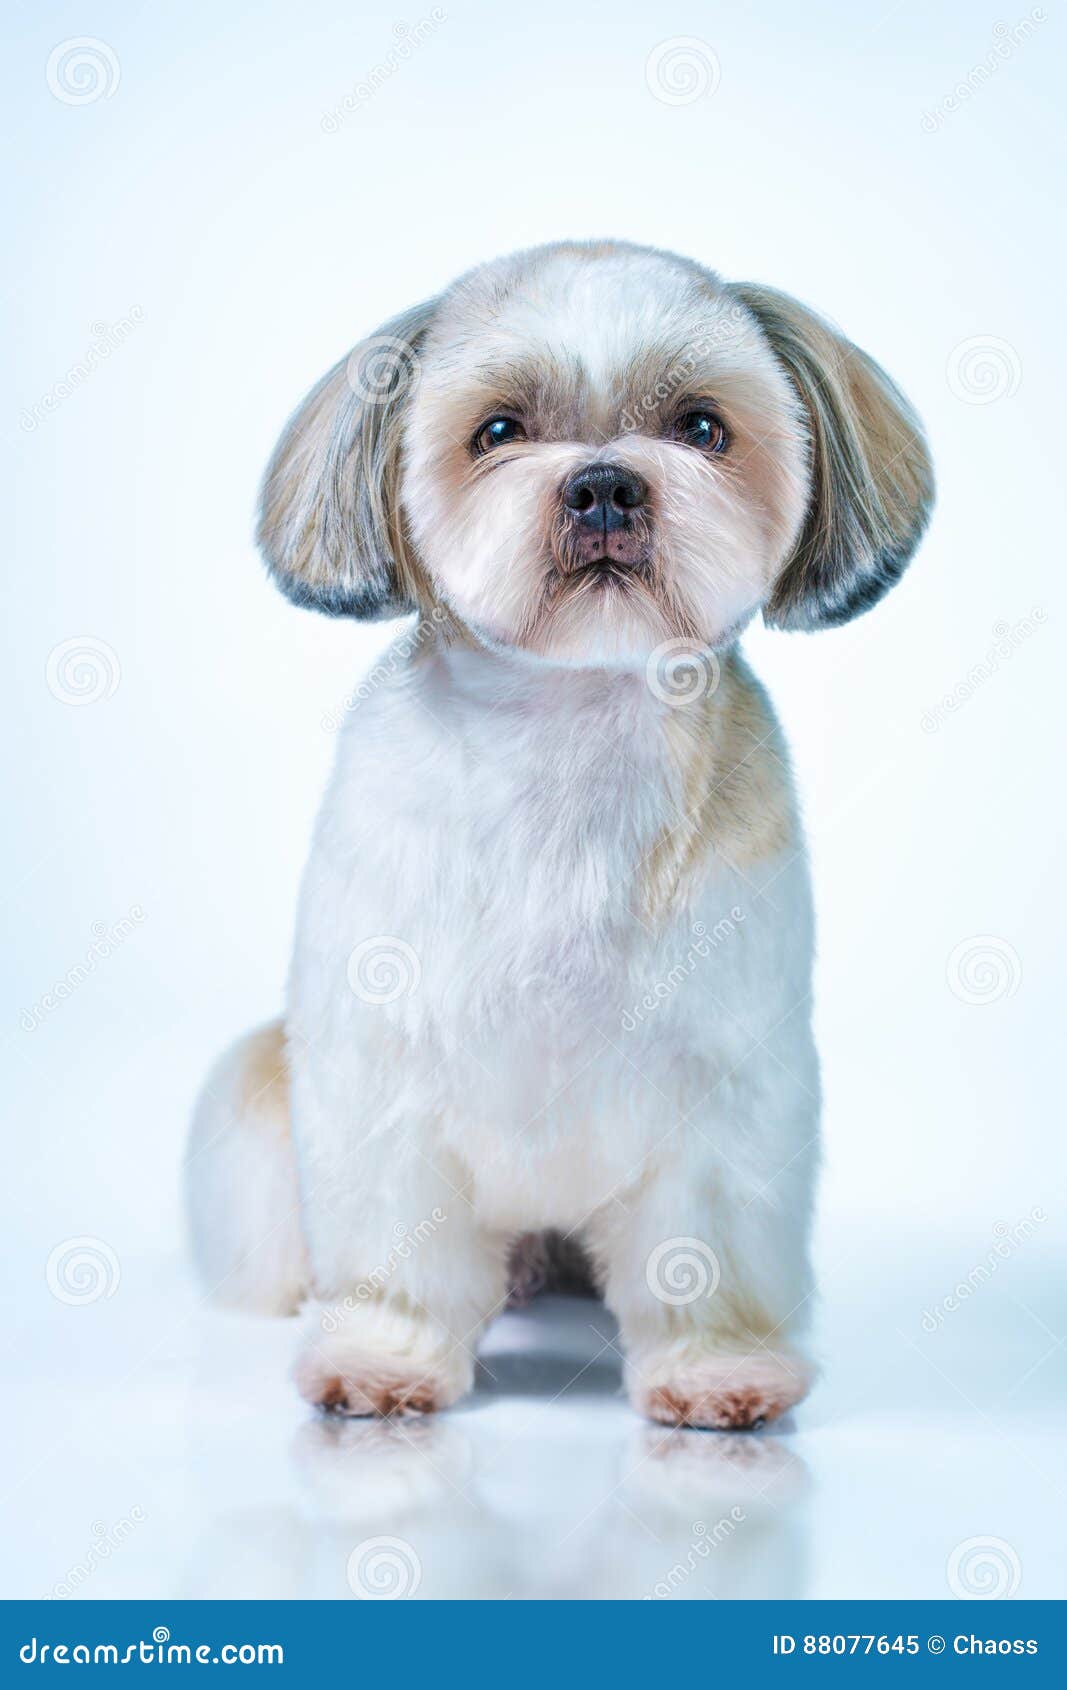 Lhasa Apso Dog Breed Information and Pictures